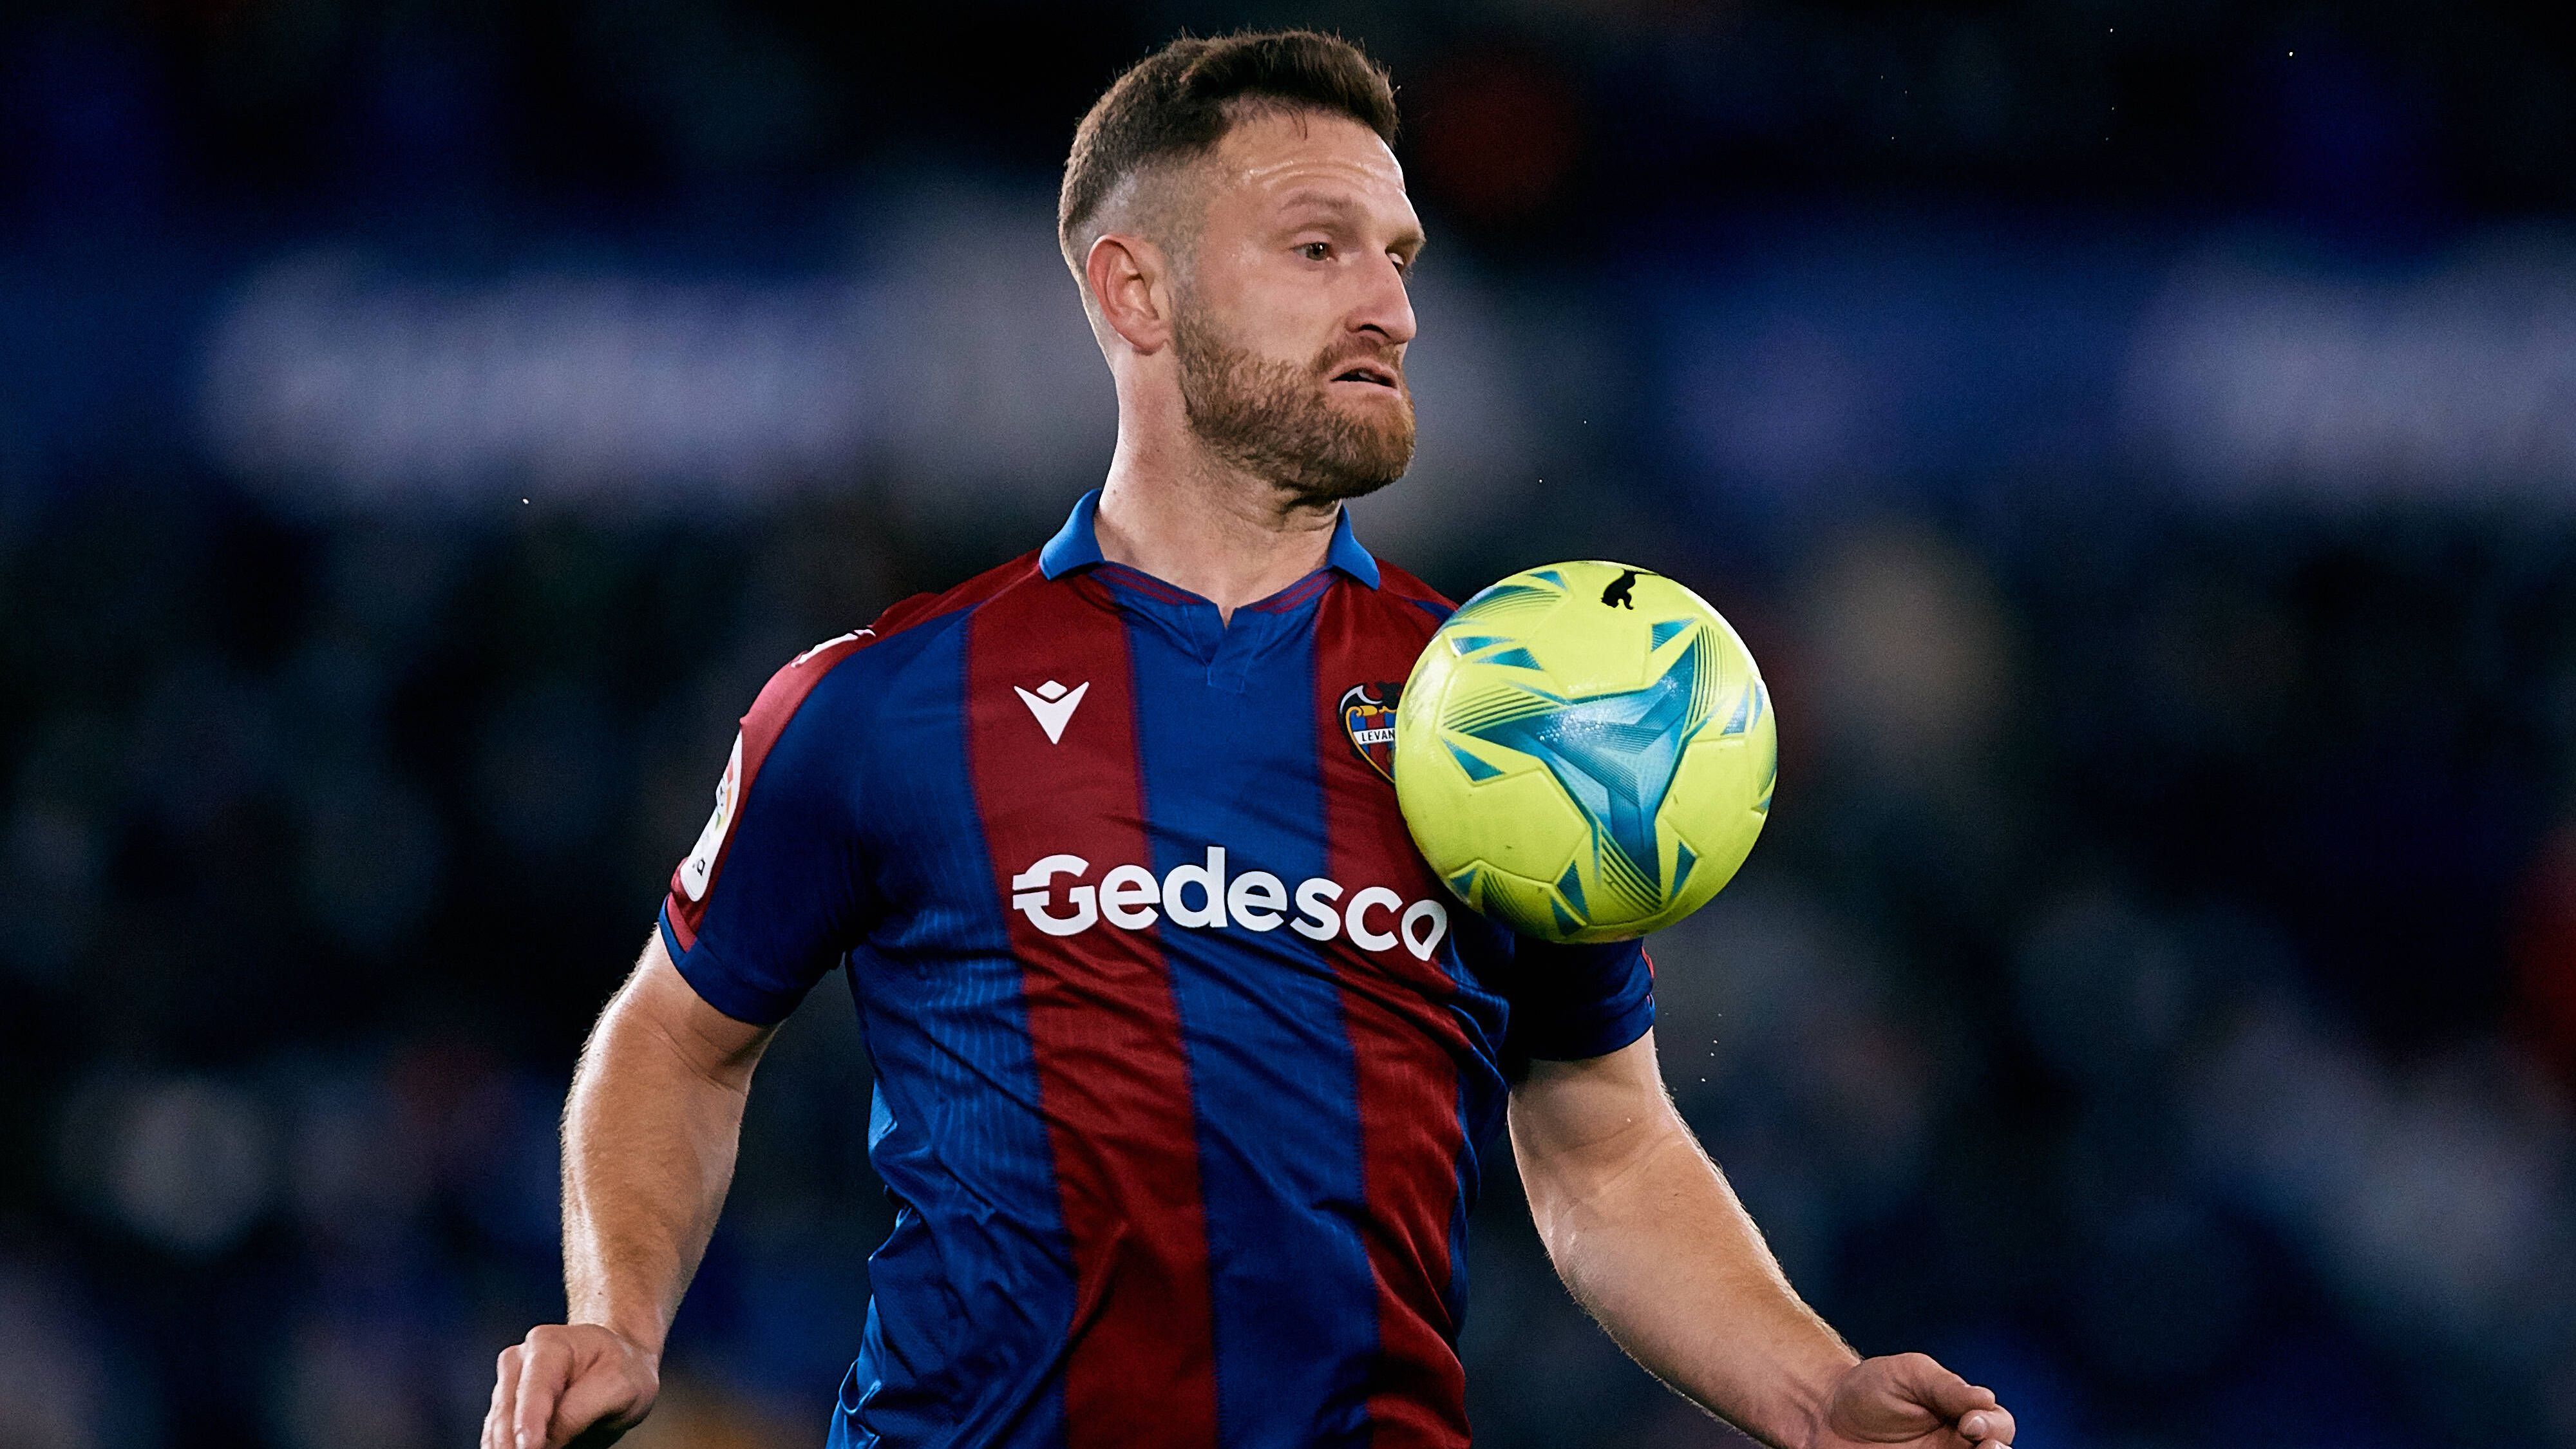 <strong>Shkodran Mustafi</strong><br><strong>- Position:</strong> Innenverteidiger<br><strong>- Alter:</strong> 31 Jahre<br><strong>- Zuletzt bei:</strong> UD Levante